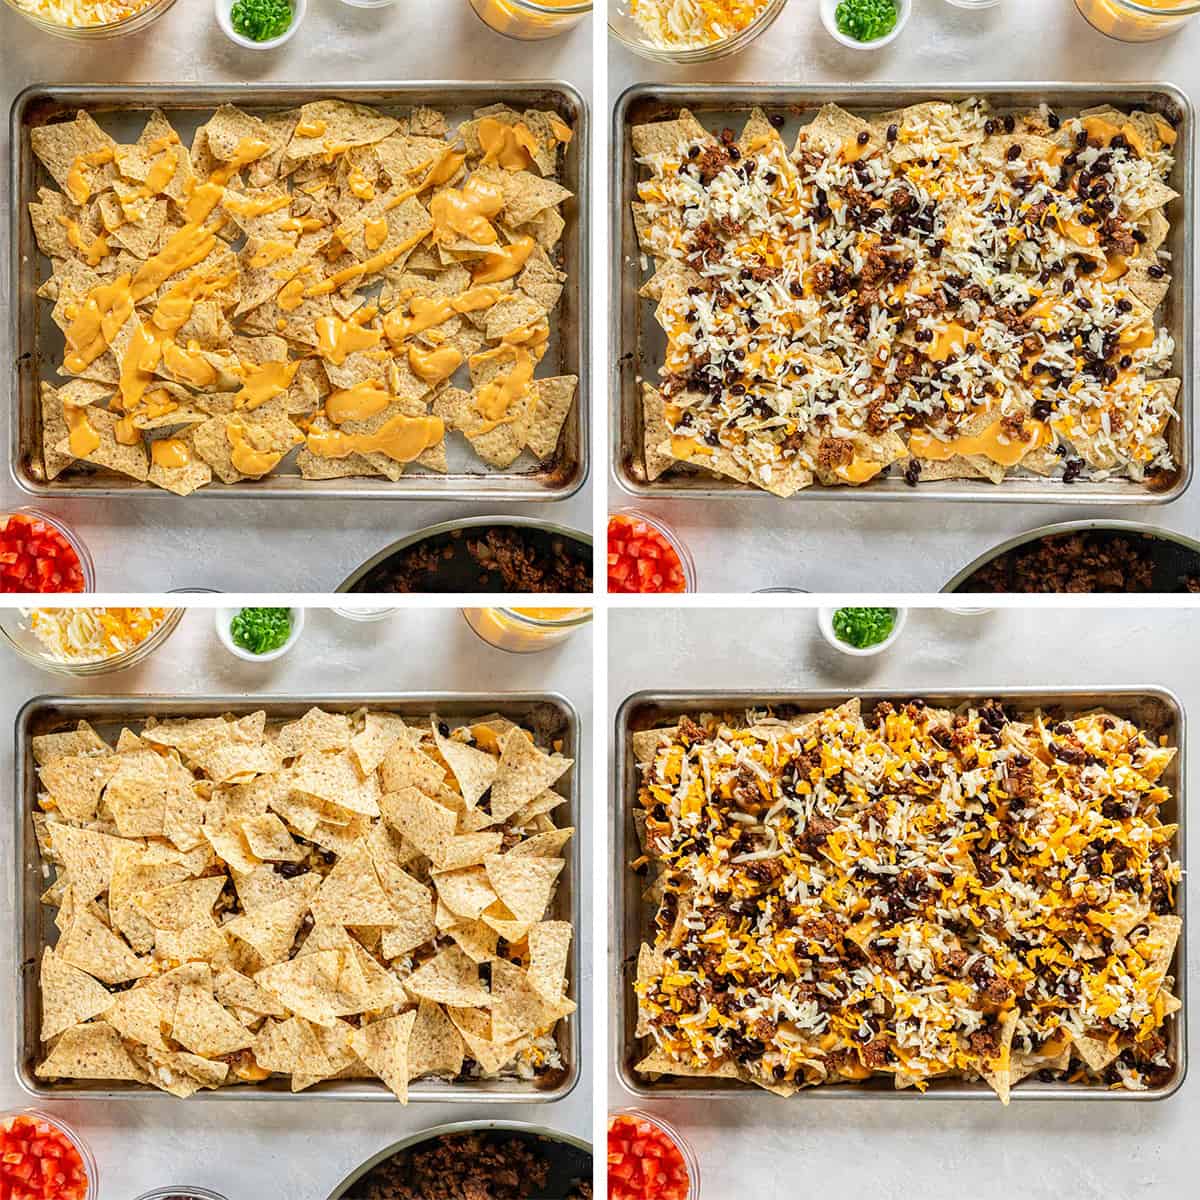 Four images of ingredients for nachos layered on a baking sheet.